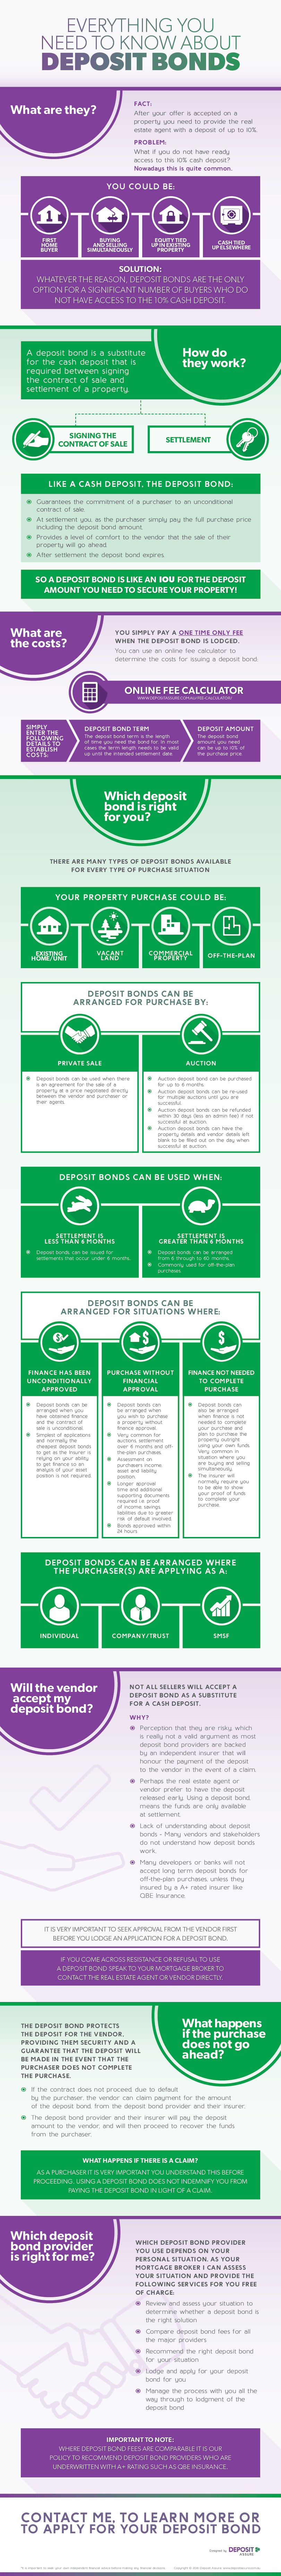 What Is A Deposit Bond? Everything You Need To Know [Infographic]